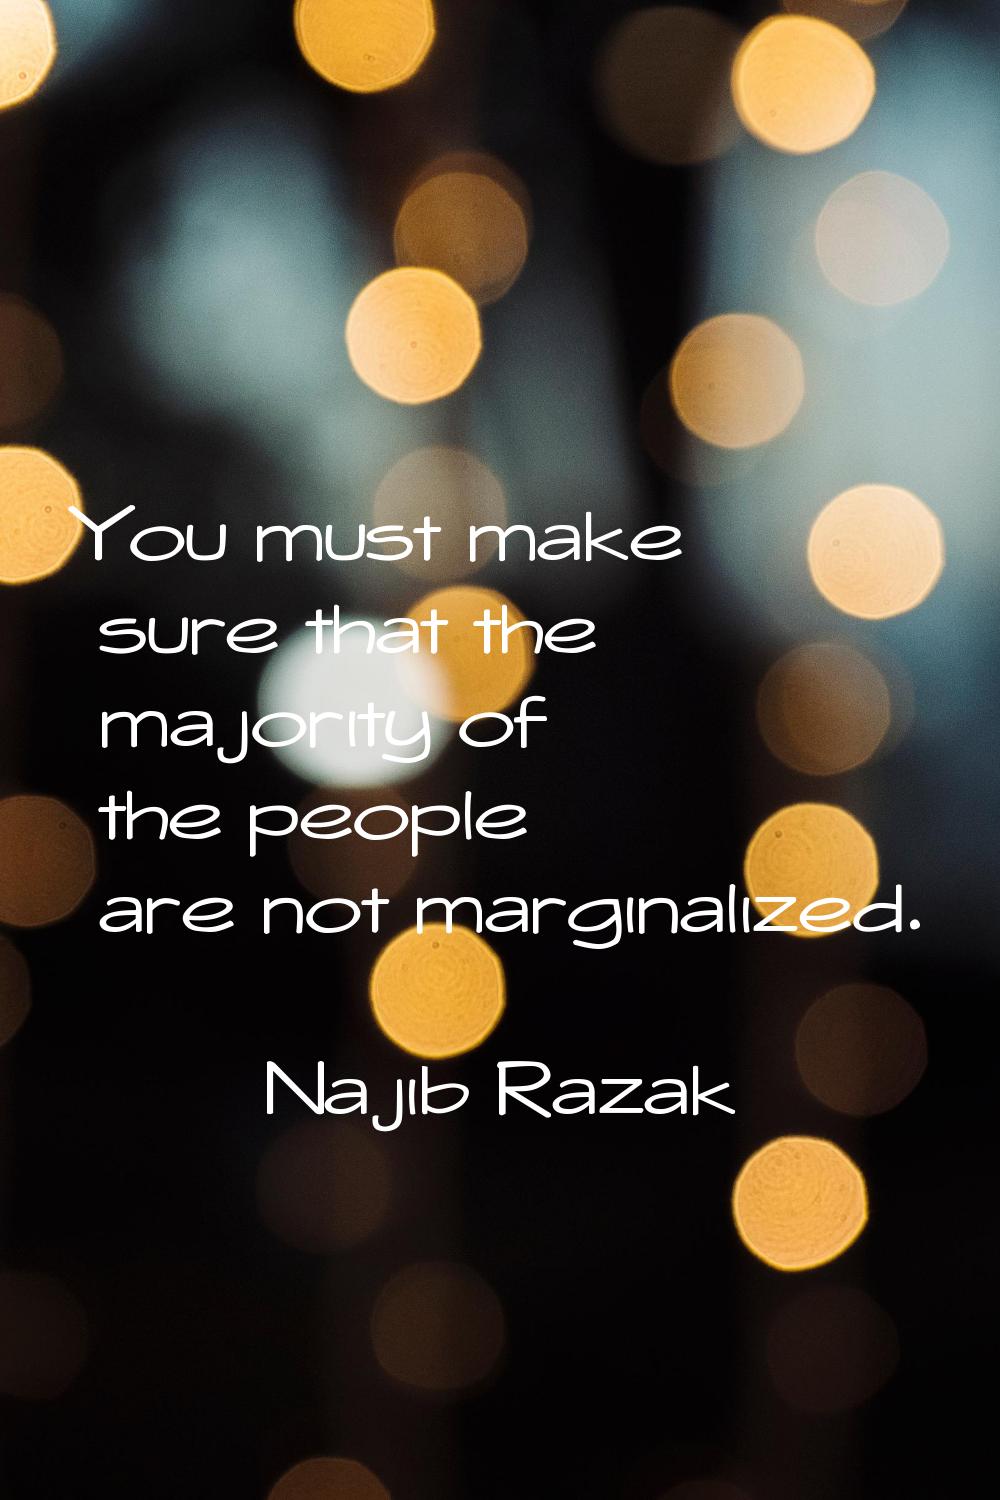 You must make sure that the majority of the people are not marginalized.